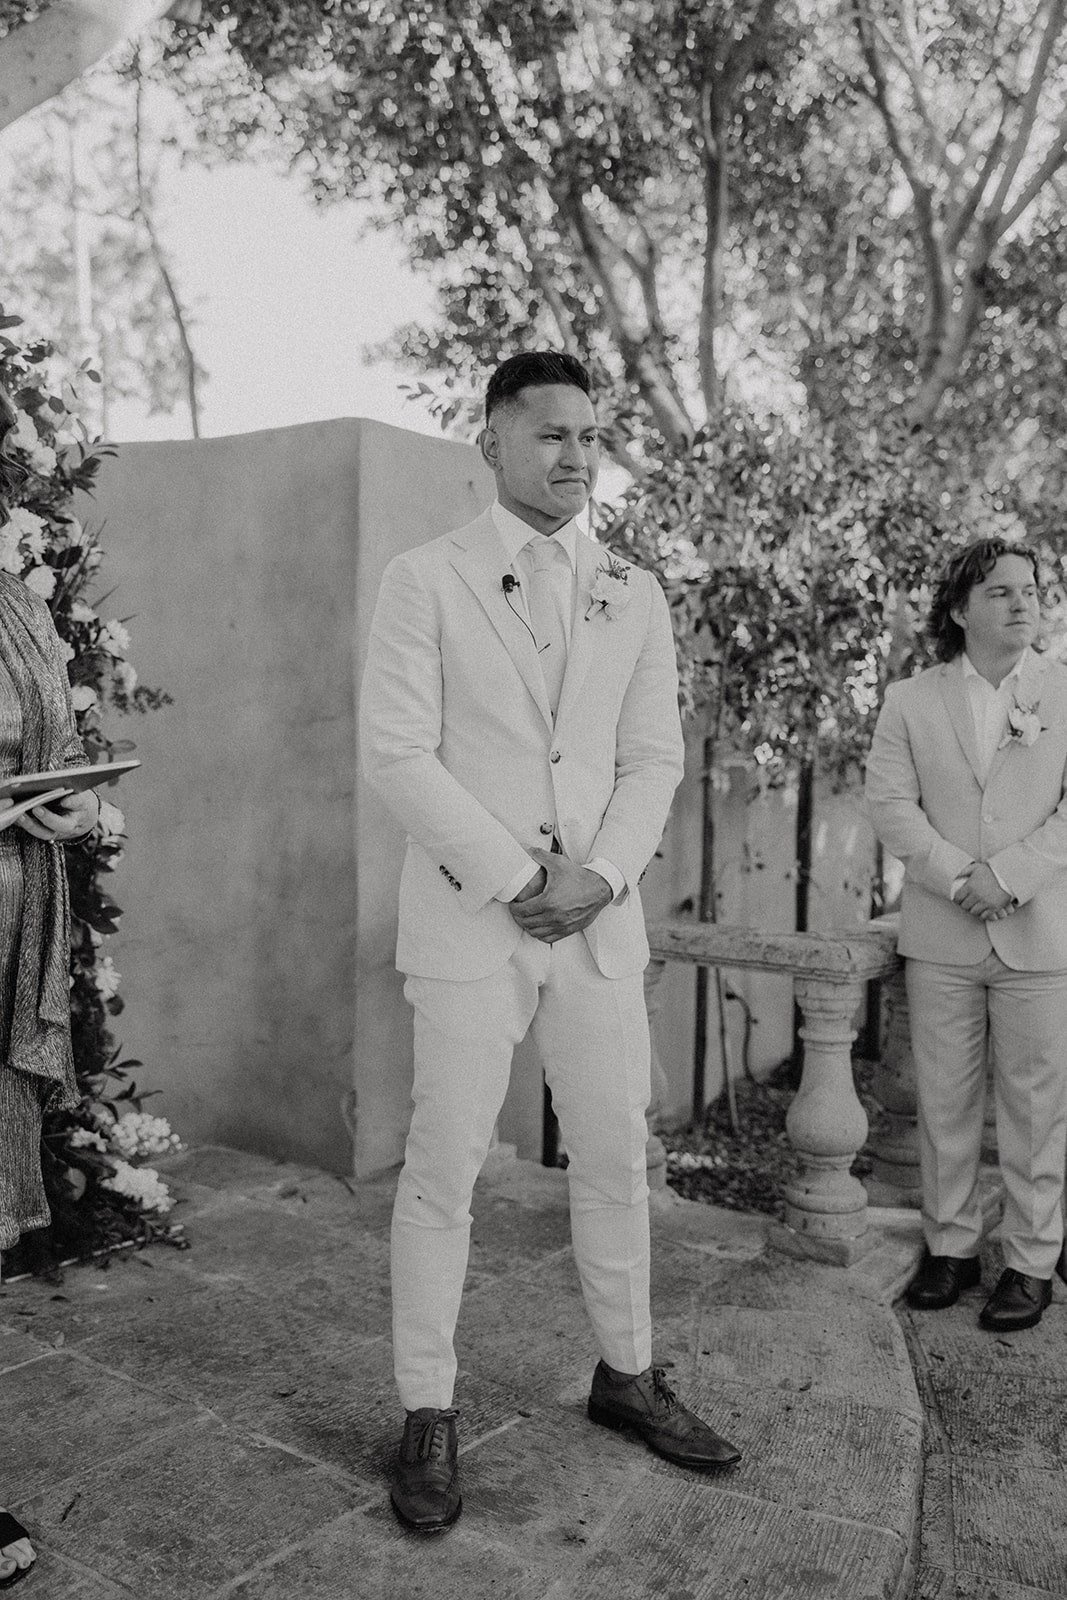 Groom gets emotional while waiting at the aisle for his bride